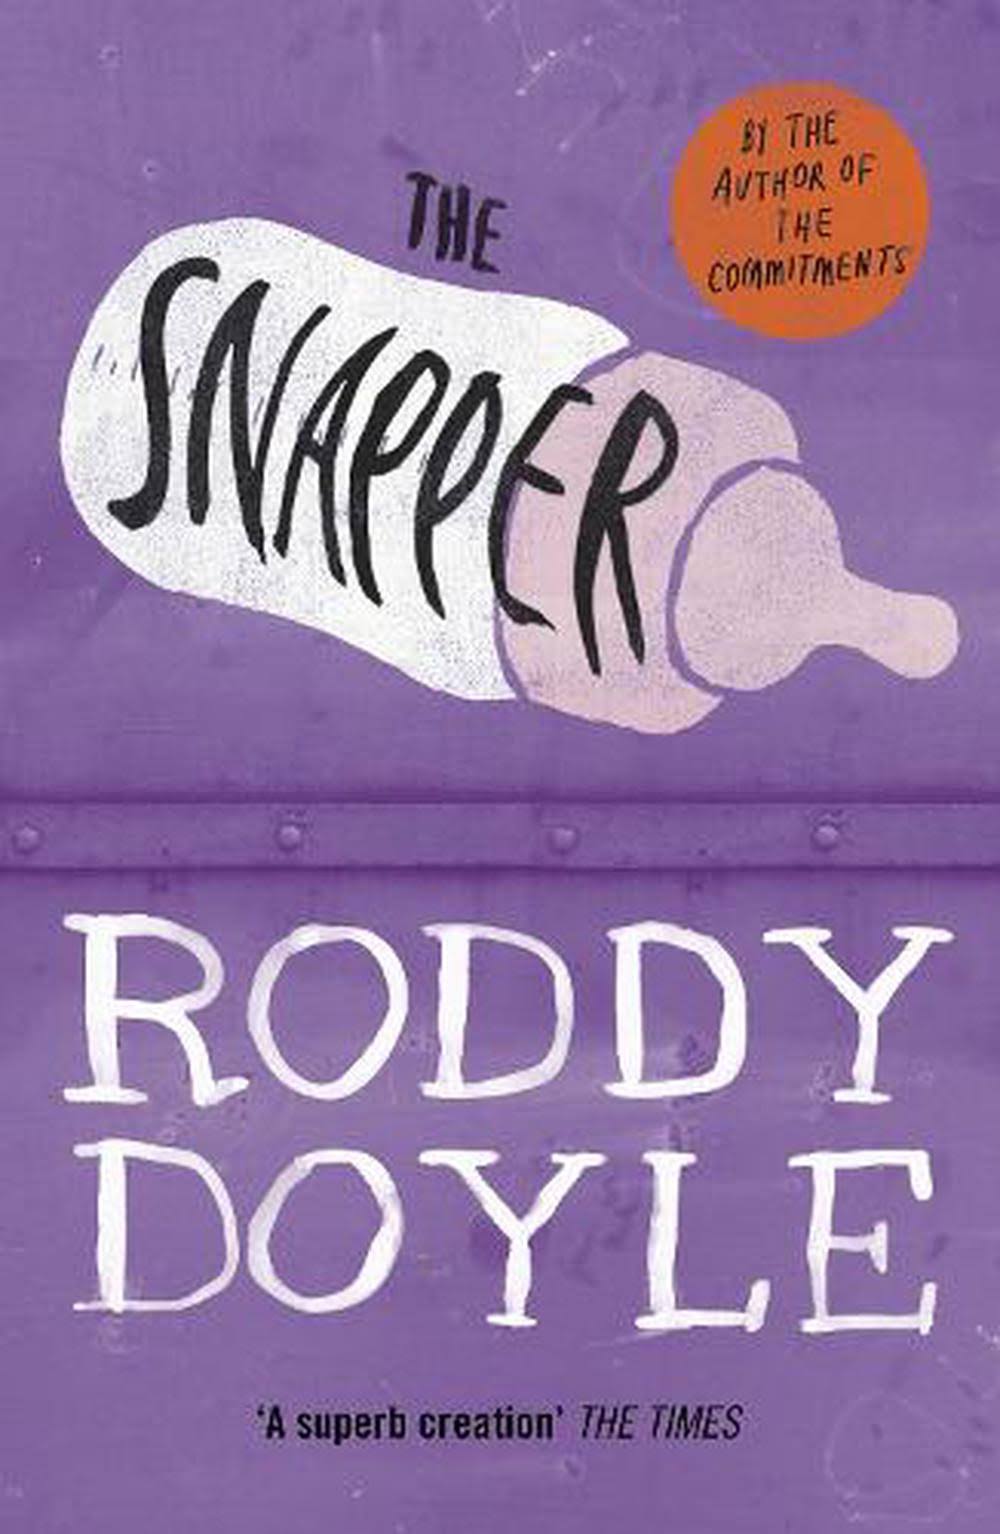 The Snapper - Roddy Doyle